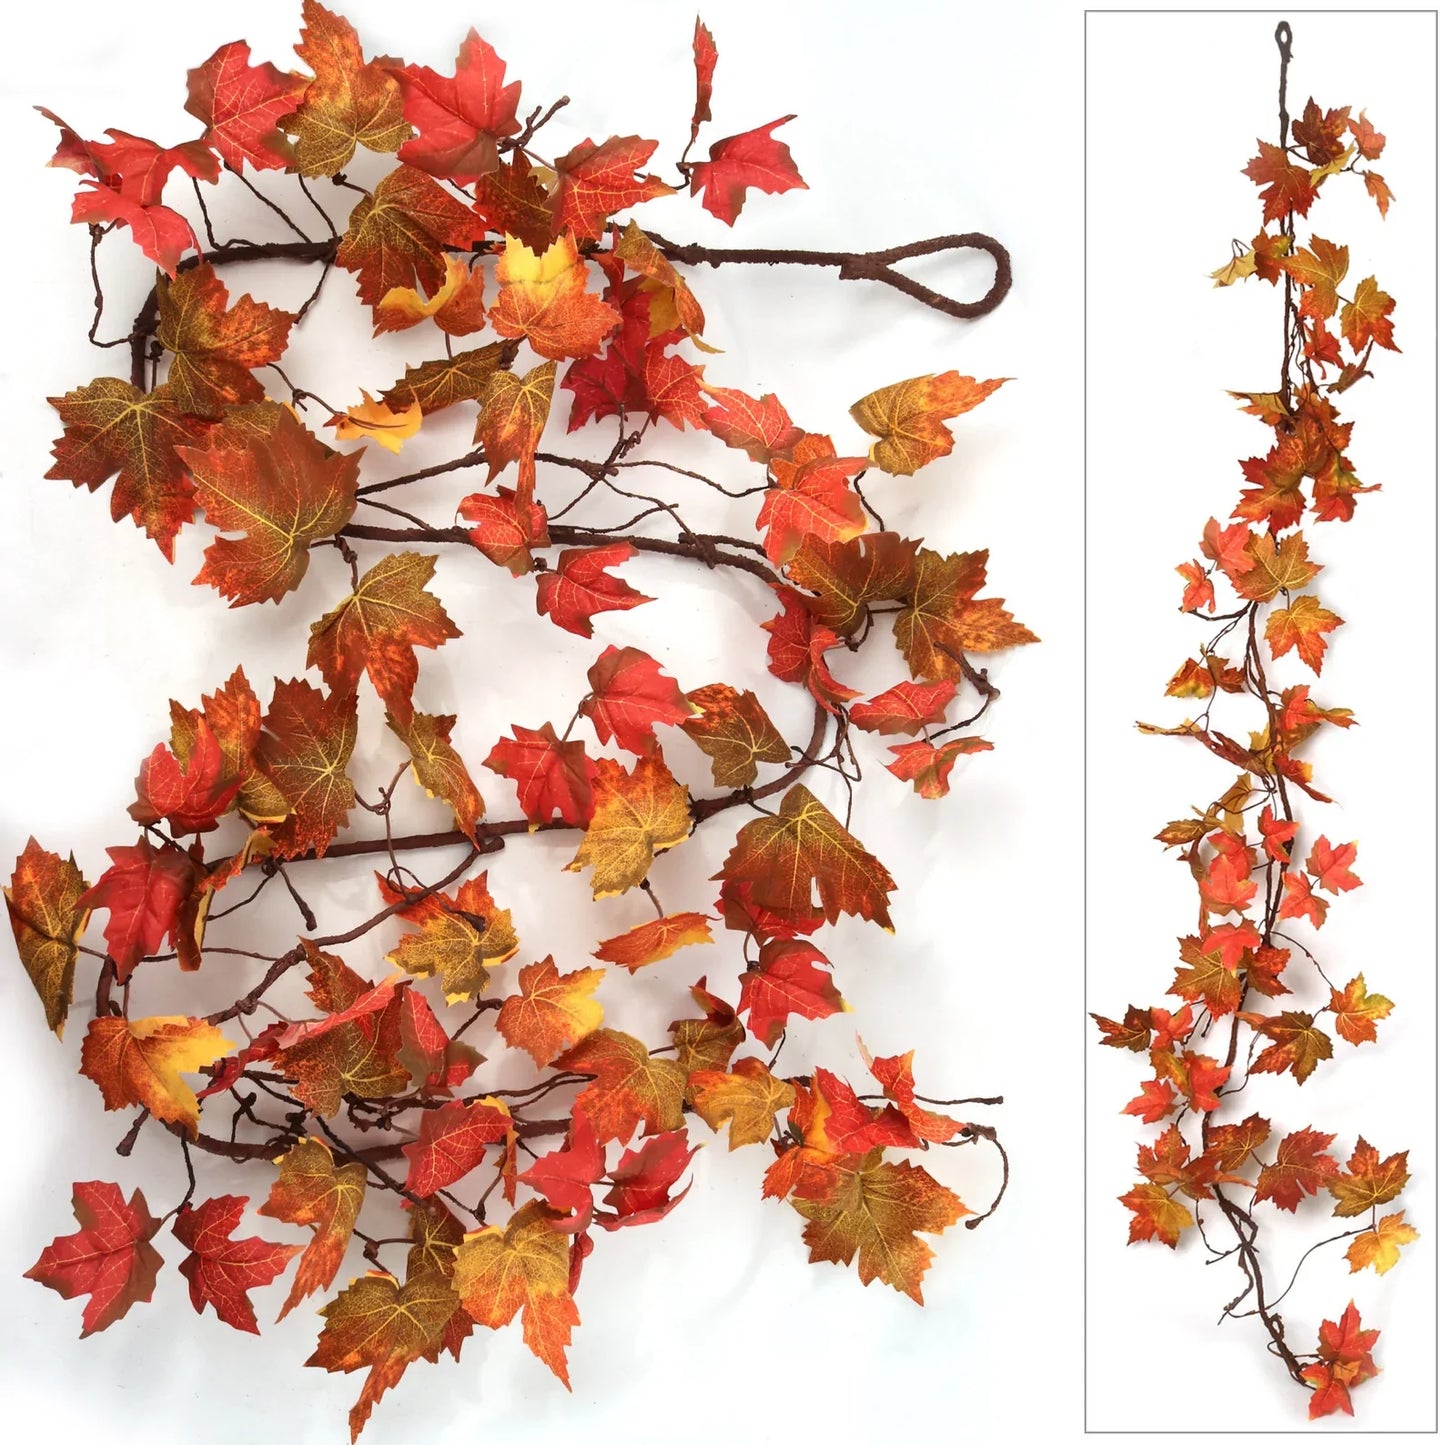 9ft Autumn Maple Leaf Garland | Lifelike Silk Leaves | Fall Thanksgiving Accents | Weatherproof Indoor/Outdoor Use | Home & Office Decor